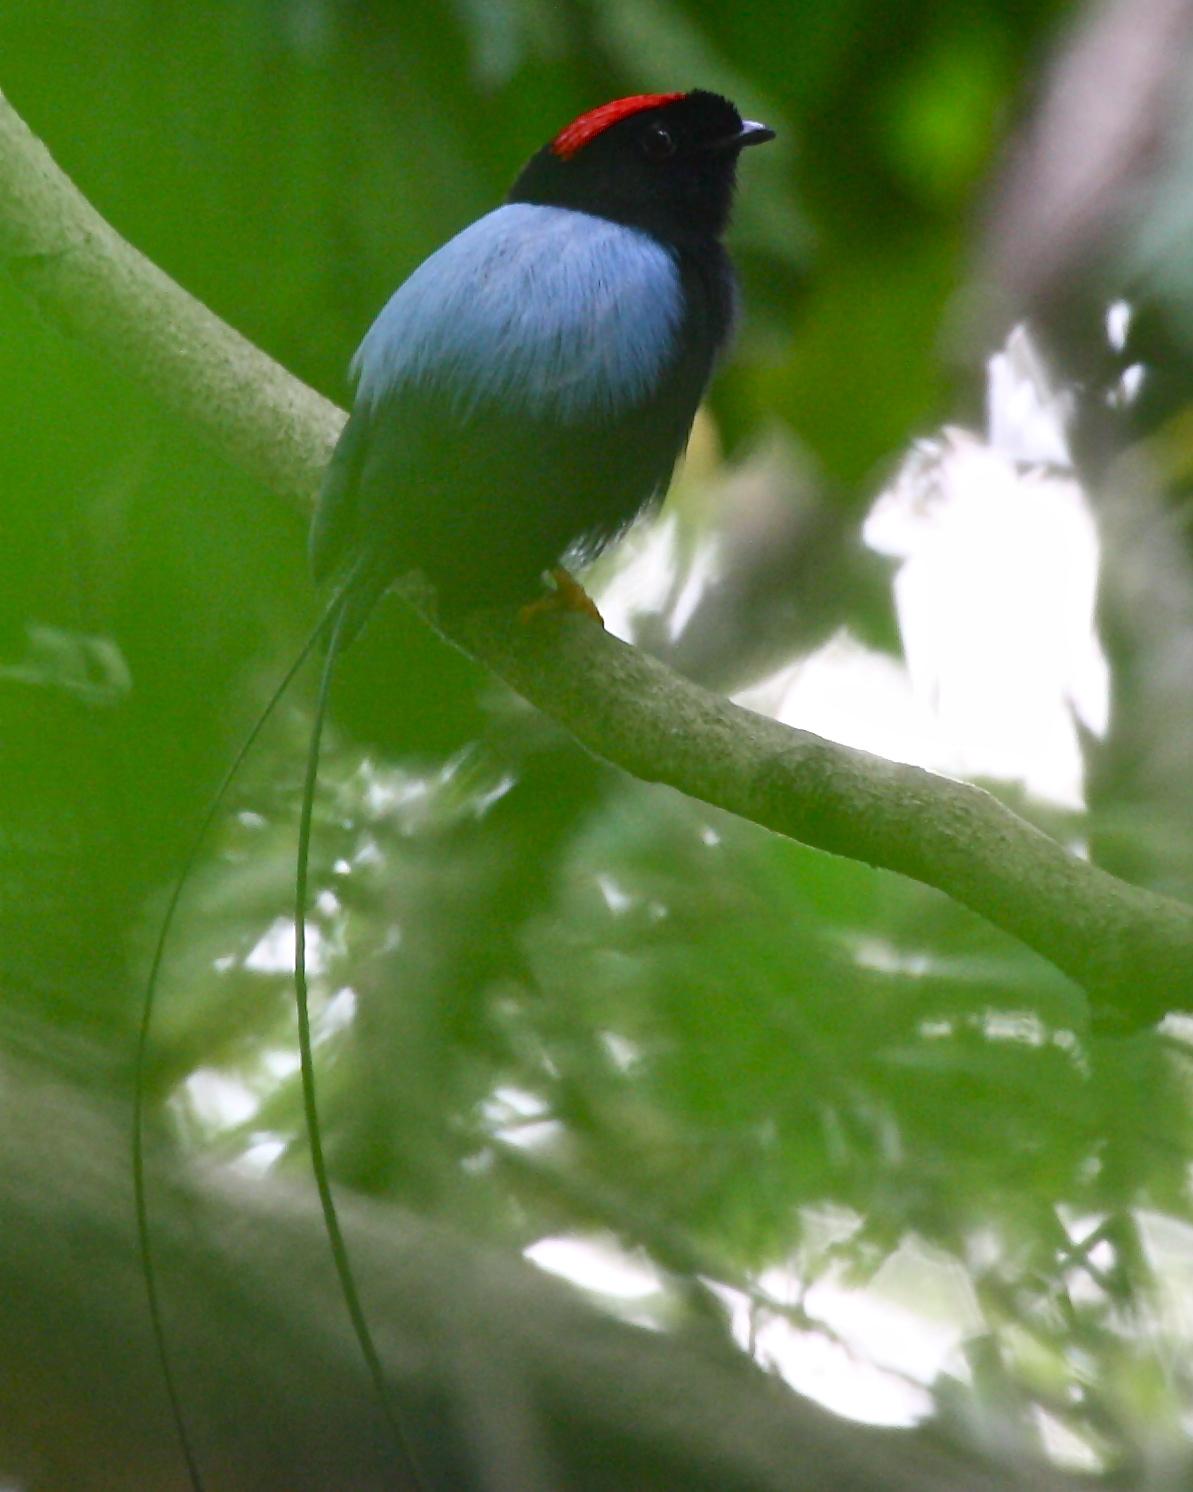 Long-tailed Manakin Photo by Michael L. P. Retter